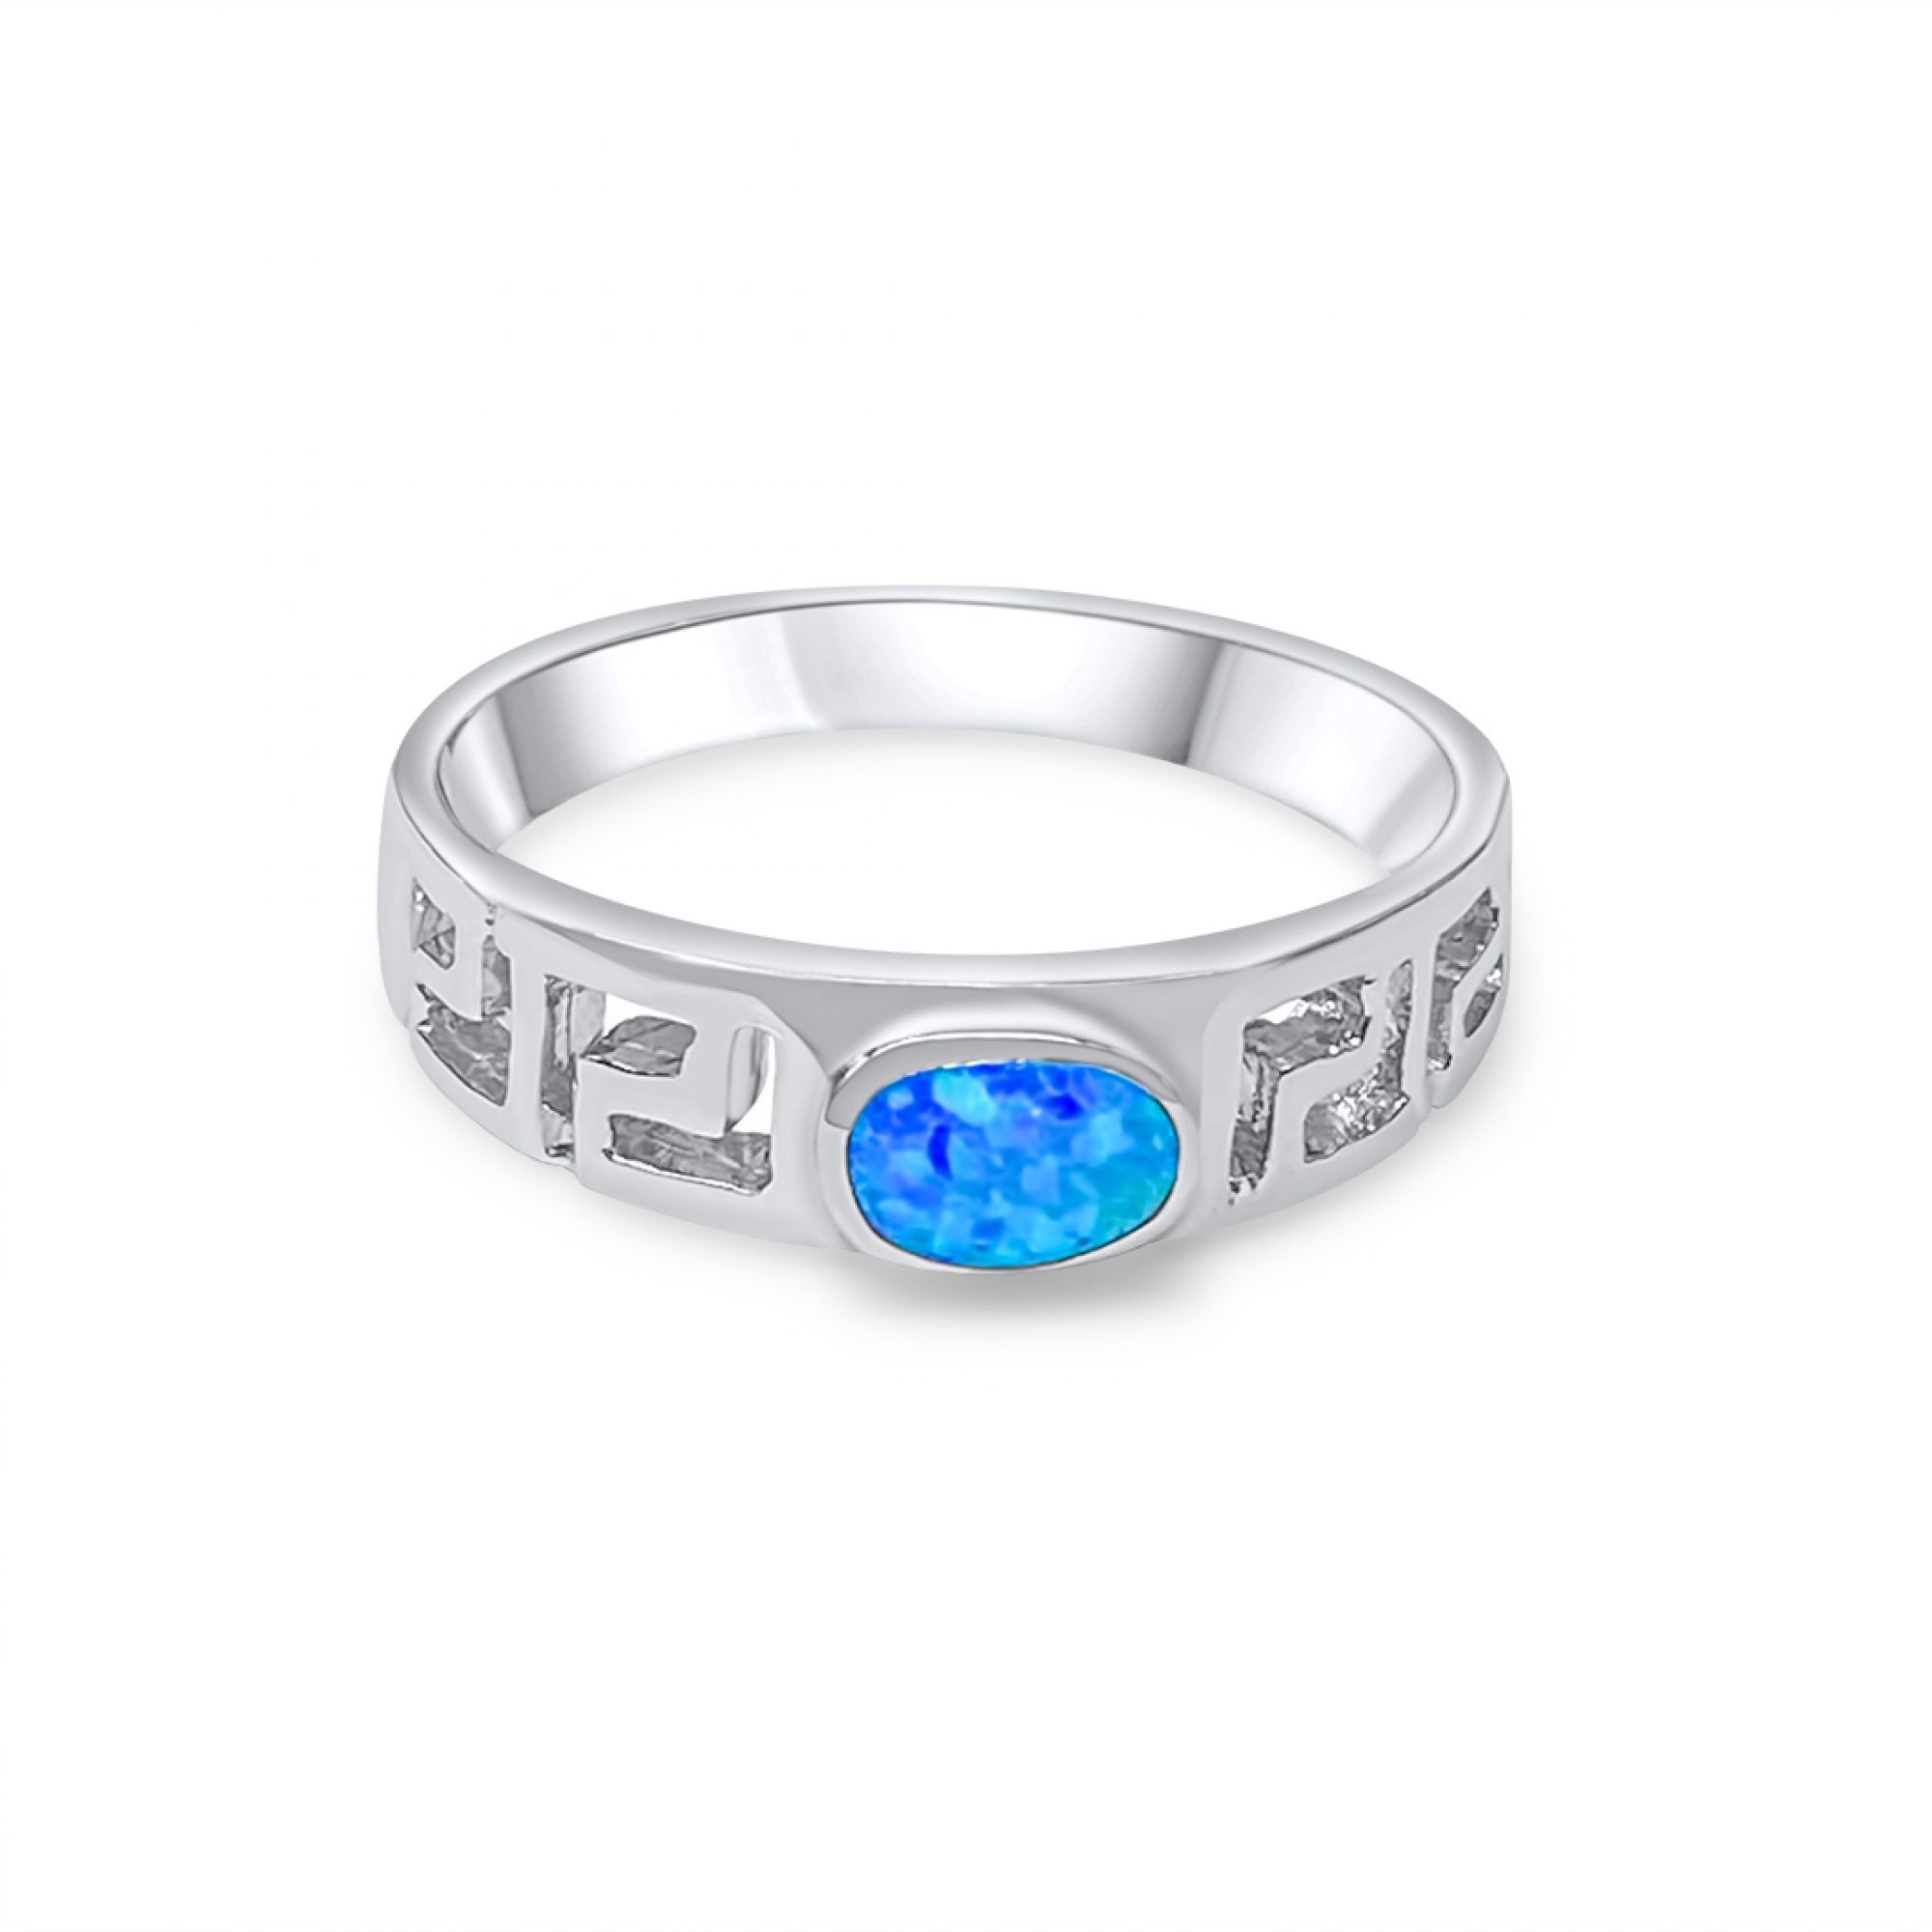 Silver ring with opal stone and meander